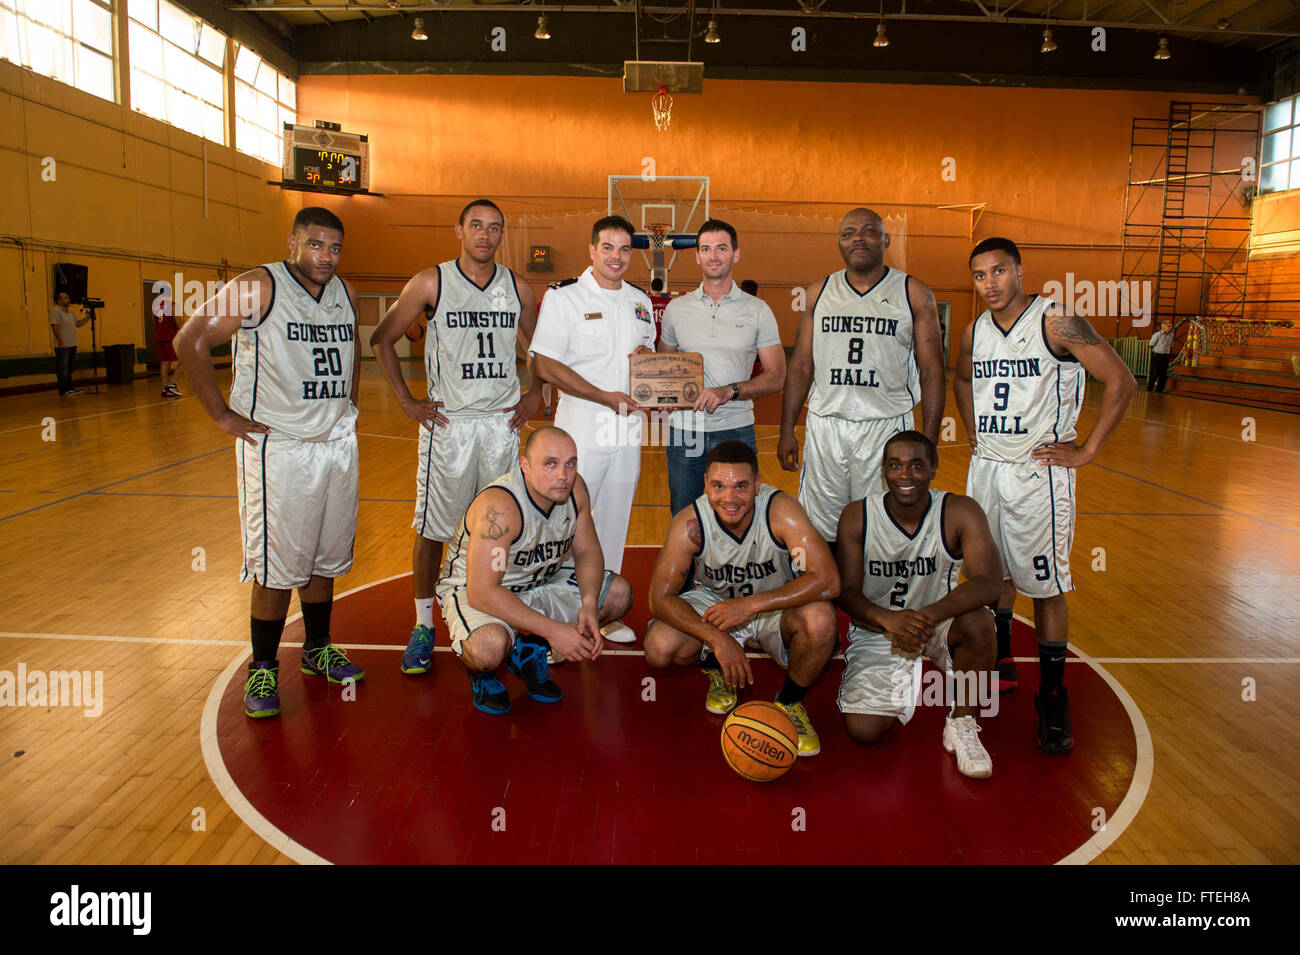 CORFU, Greece (Oct. 11, 2014) –  Sailors from the amphibious dock landing ship USS Gunston Hall (LSD 44) exchange gifts during a friendly basketball game with a local team while in port. This port visit serves to continue efforts to strengthen maritime partnerships in order to enhance regional stability. Gunston Hall is part of the Bataan Amphibious Ready Group, and with the embarked 22nd Marine Expeditionary Unit, is deployed in support of maritime security operations and theater security cooperation efforts in the U.S. 6th Fleet area of responsibility. Stock Photo